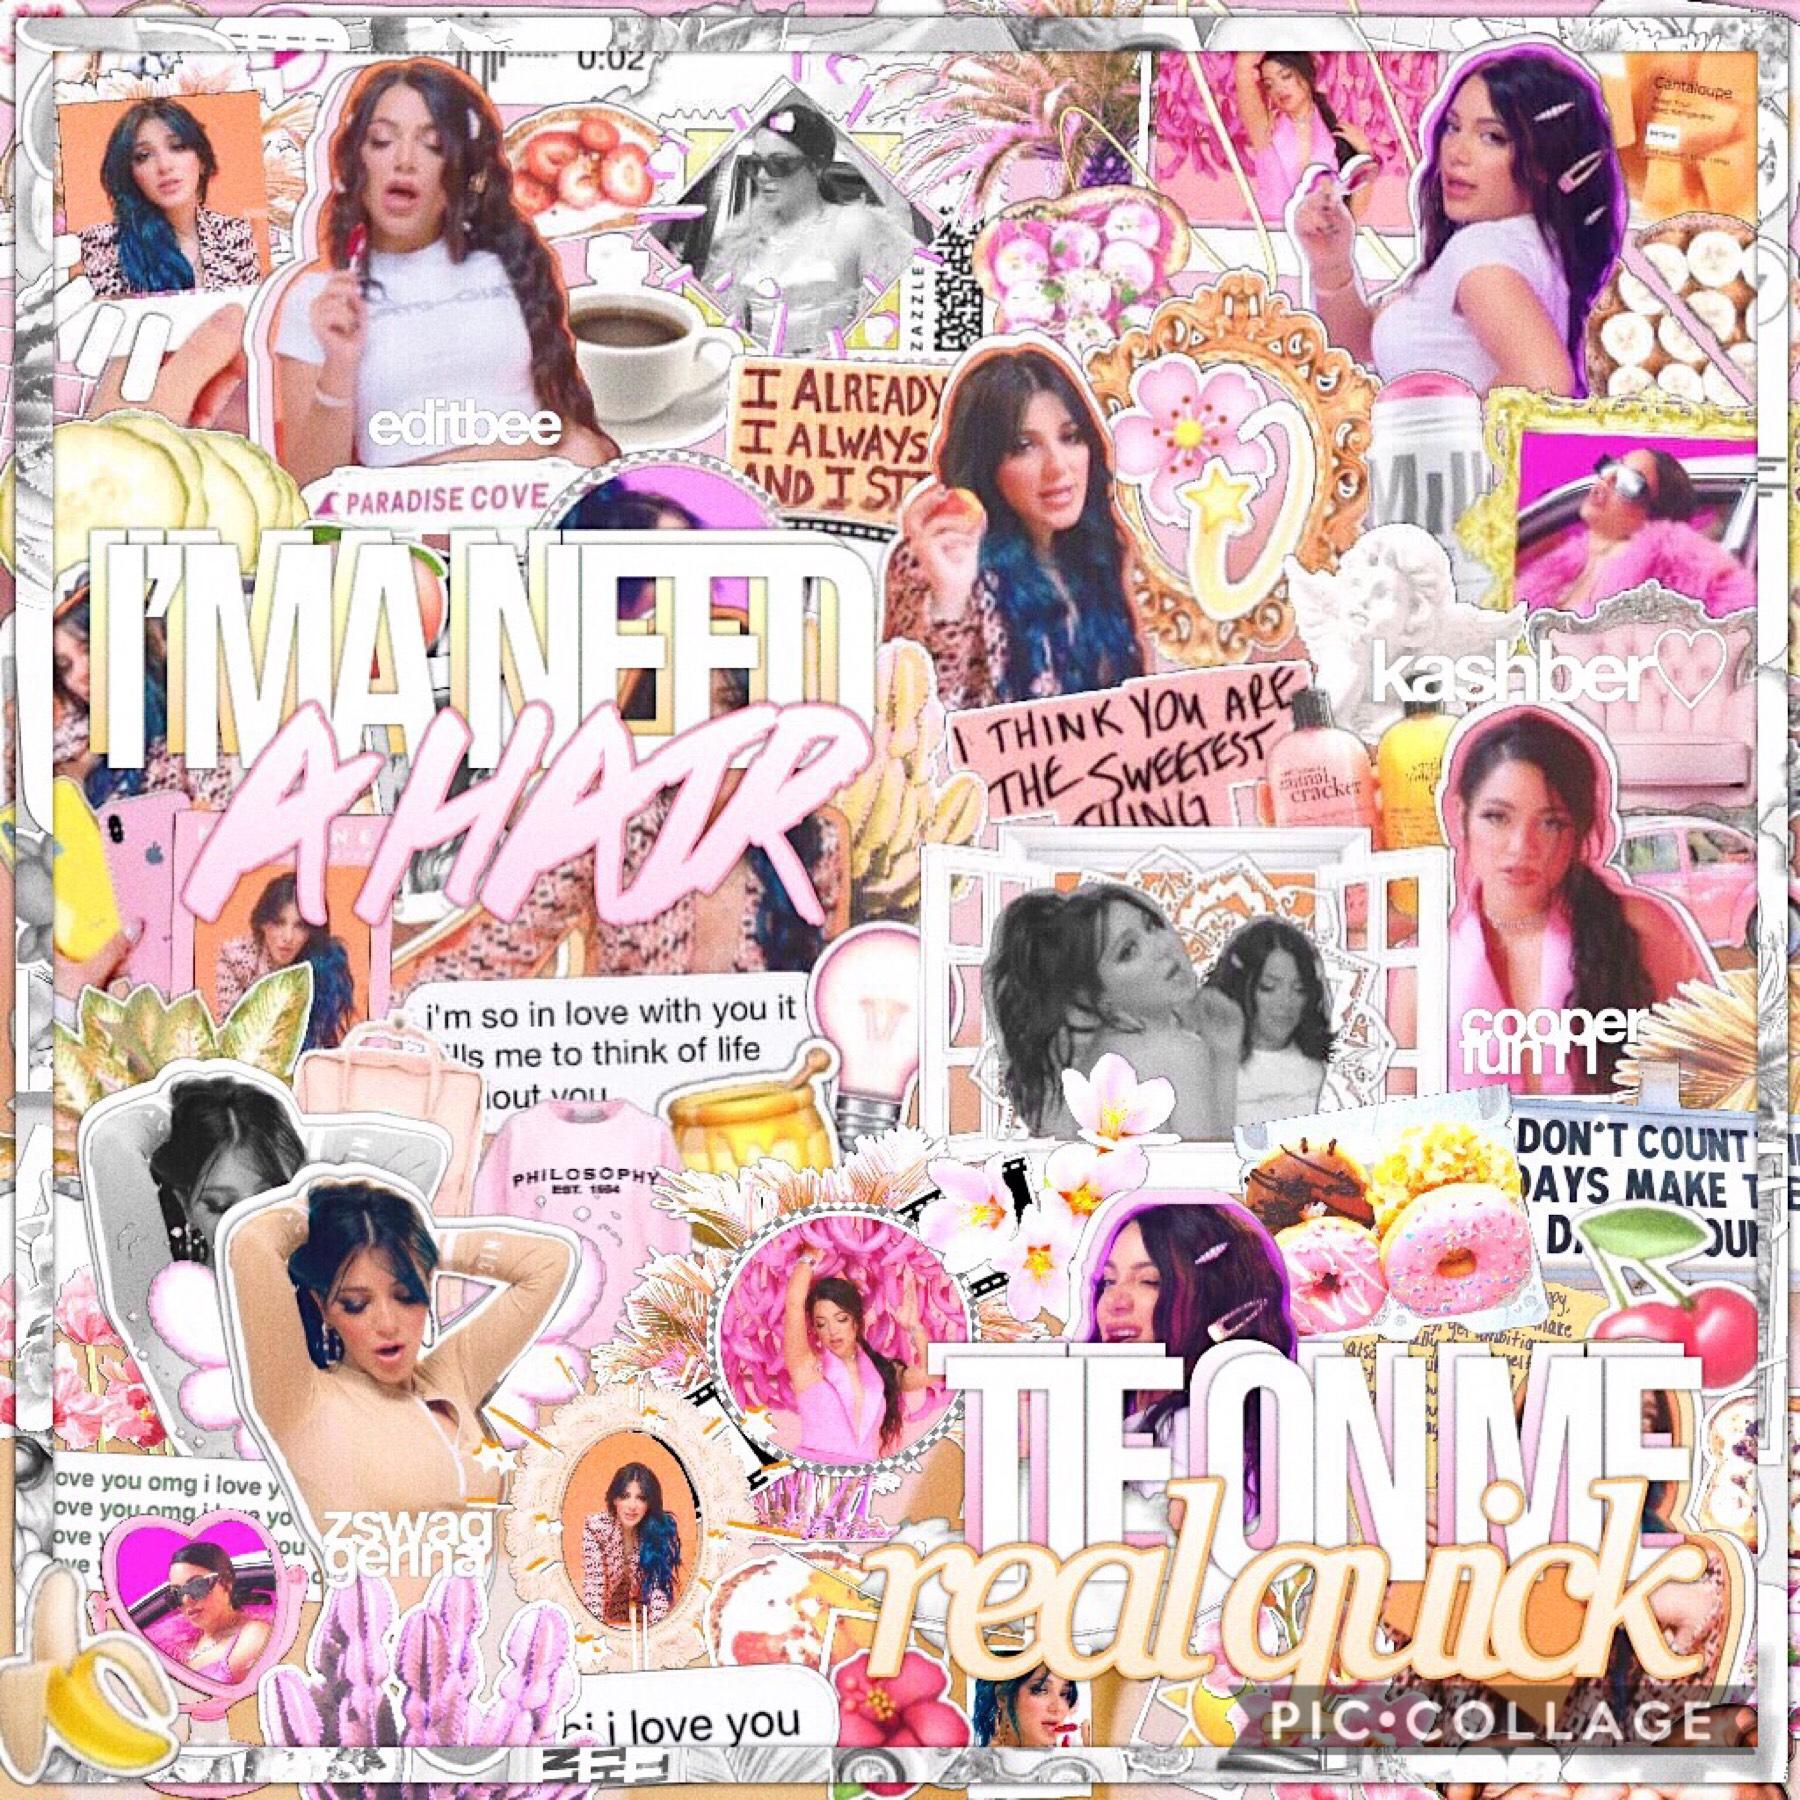 #kashber collab 💗💛 i love my best friends and how they’re talented aaaahh 👯‍♀️ follow them @editbee @cooperfun11 !! ☺️ 
this collab is so beautiful 😍 